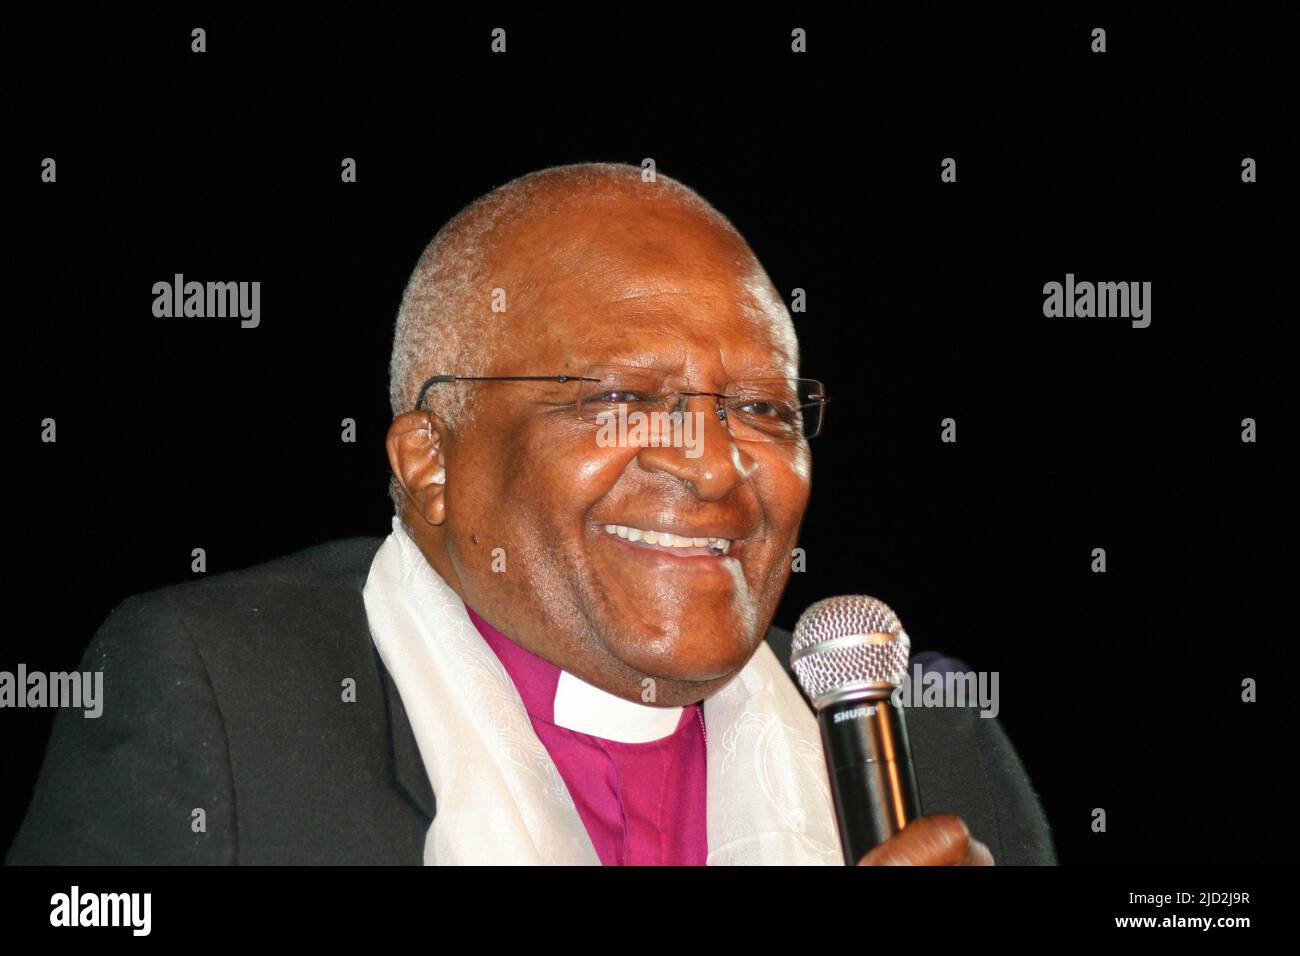 Archbishop Desmond Tutu giving a speech at the Humanity's Team Conference at Freedom Park, Pretoria/Tshwane, Gauteng, South Africa. Stock Photo